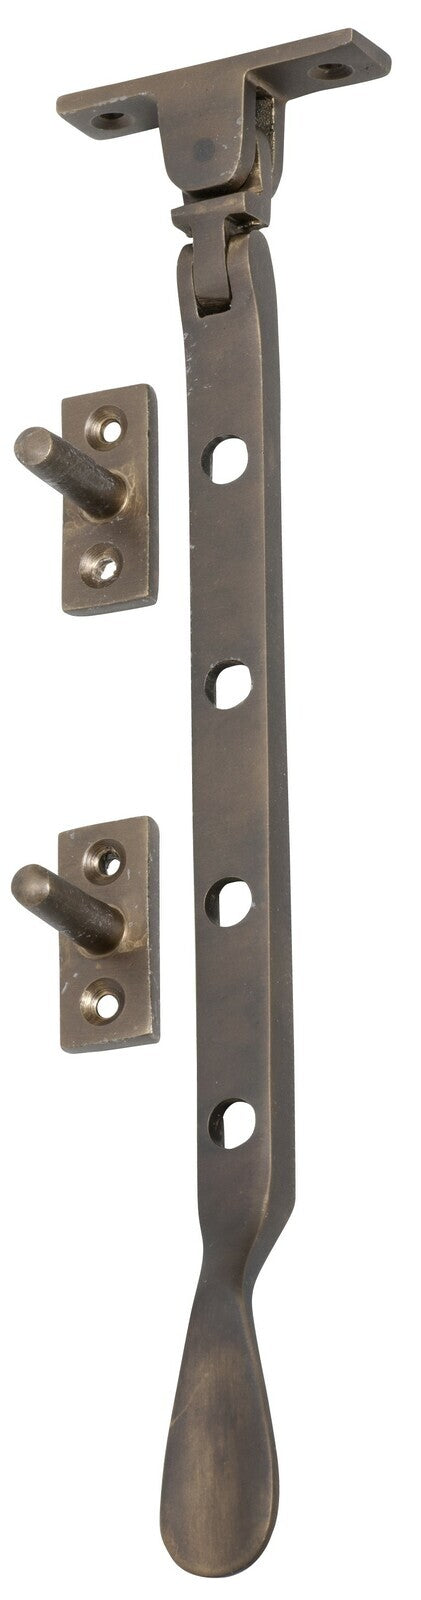 TRADCO BASE FIX CASEMENT STAY 200MM - AVAILABLE IN VARIOUS FINISHES